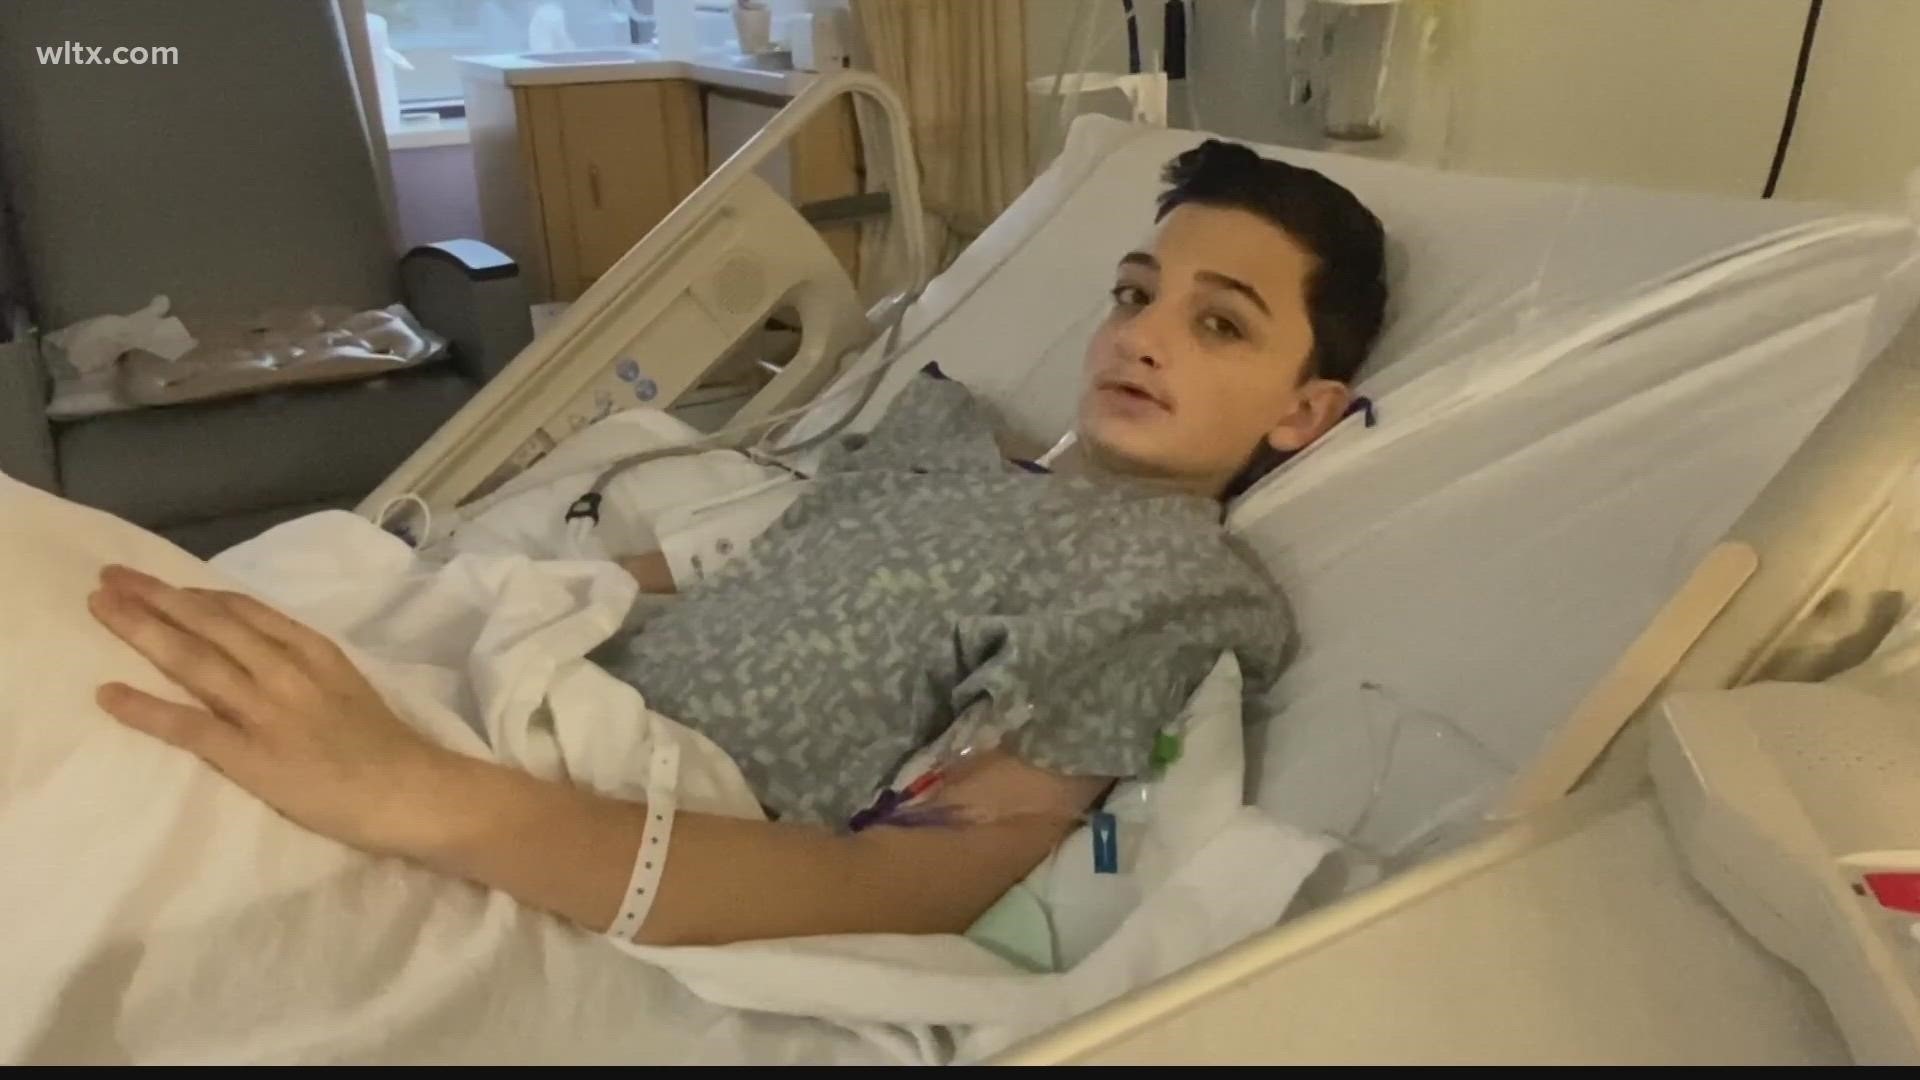 Earlier this month, a Sumter teen suffered a stroke while at school. While he is on the road to recovery, his family hopes others can learn it.